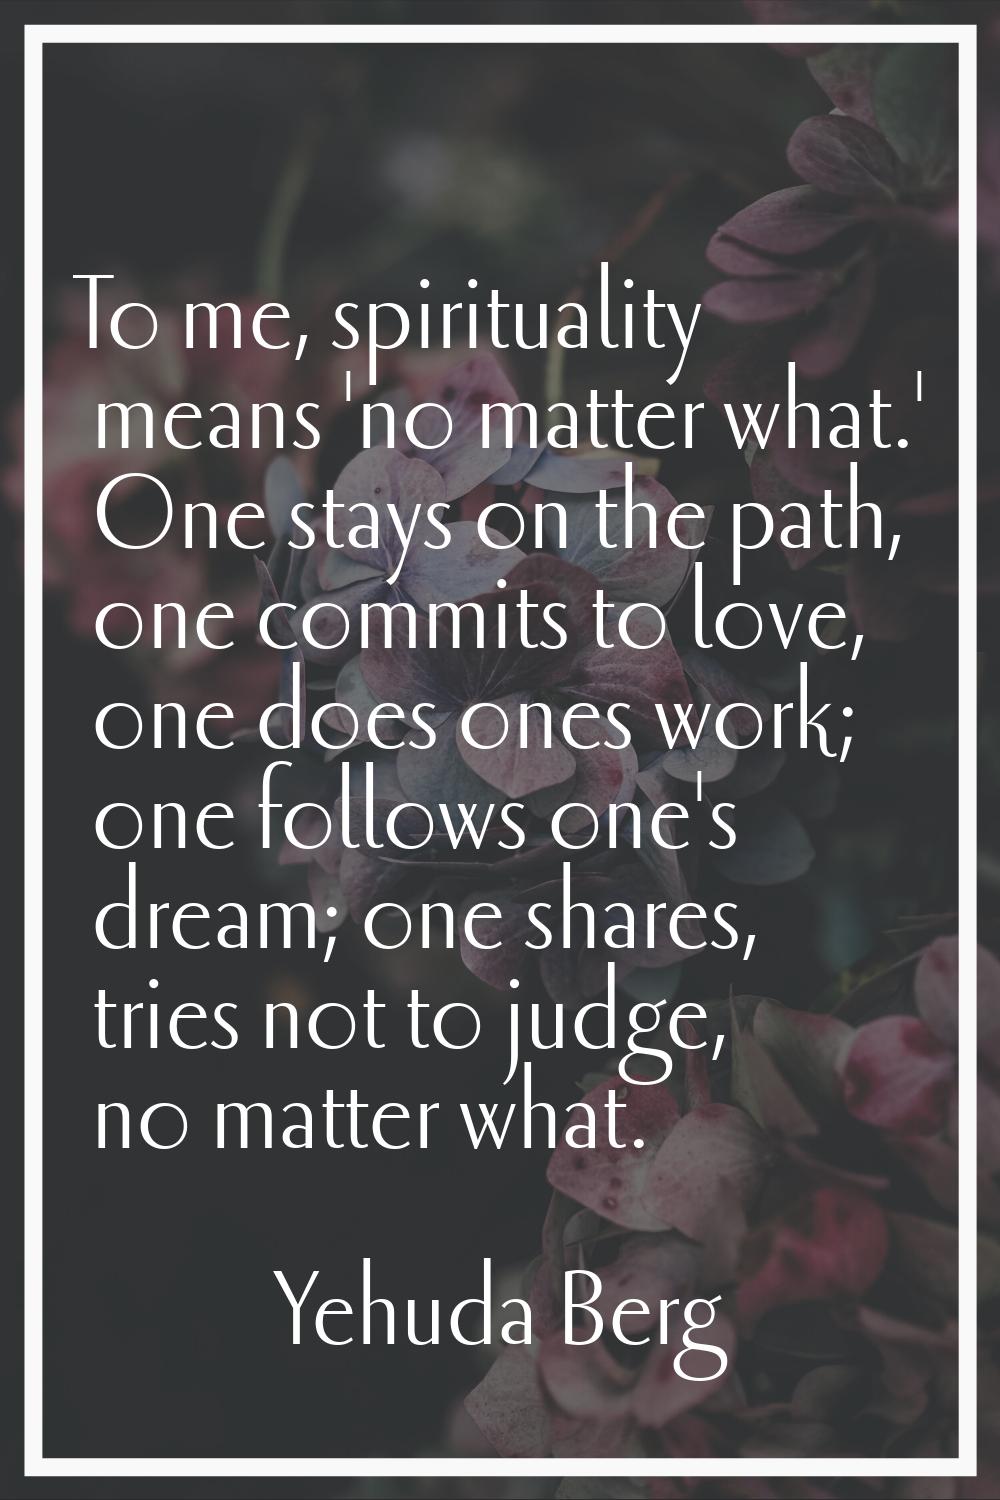 To me, spirituality means 'no matter what.' One stays on the path, one commits to love, one does on